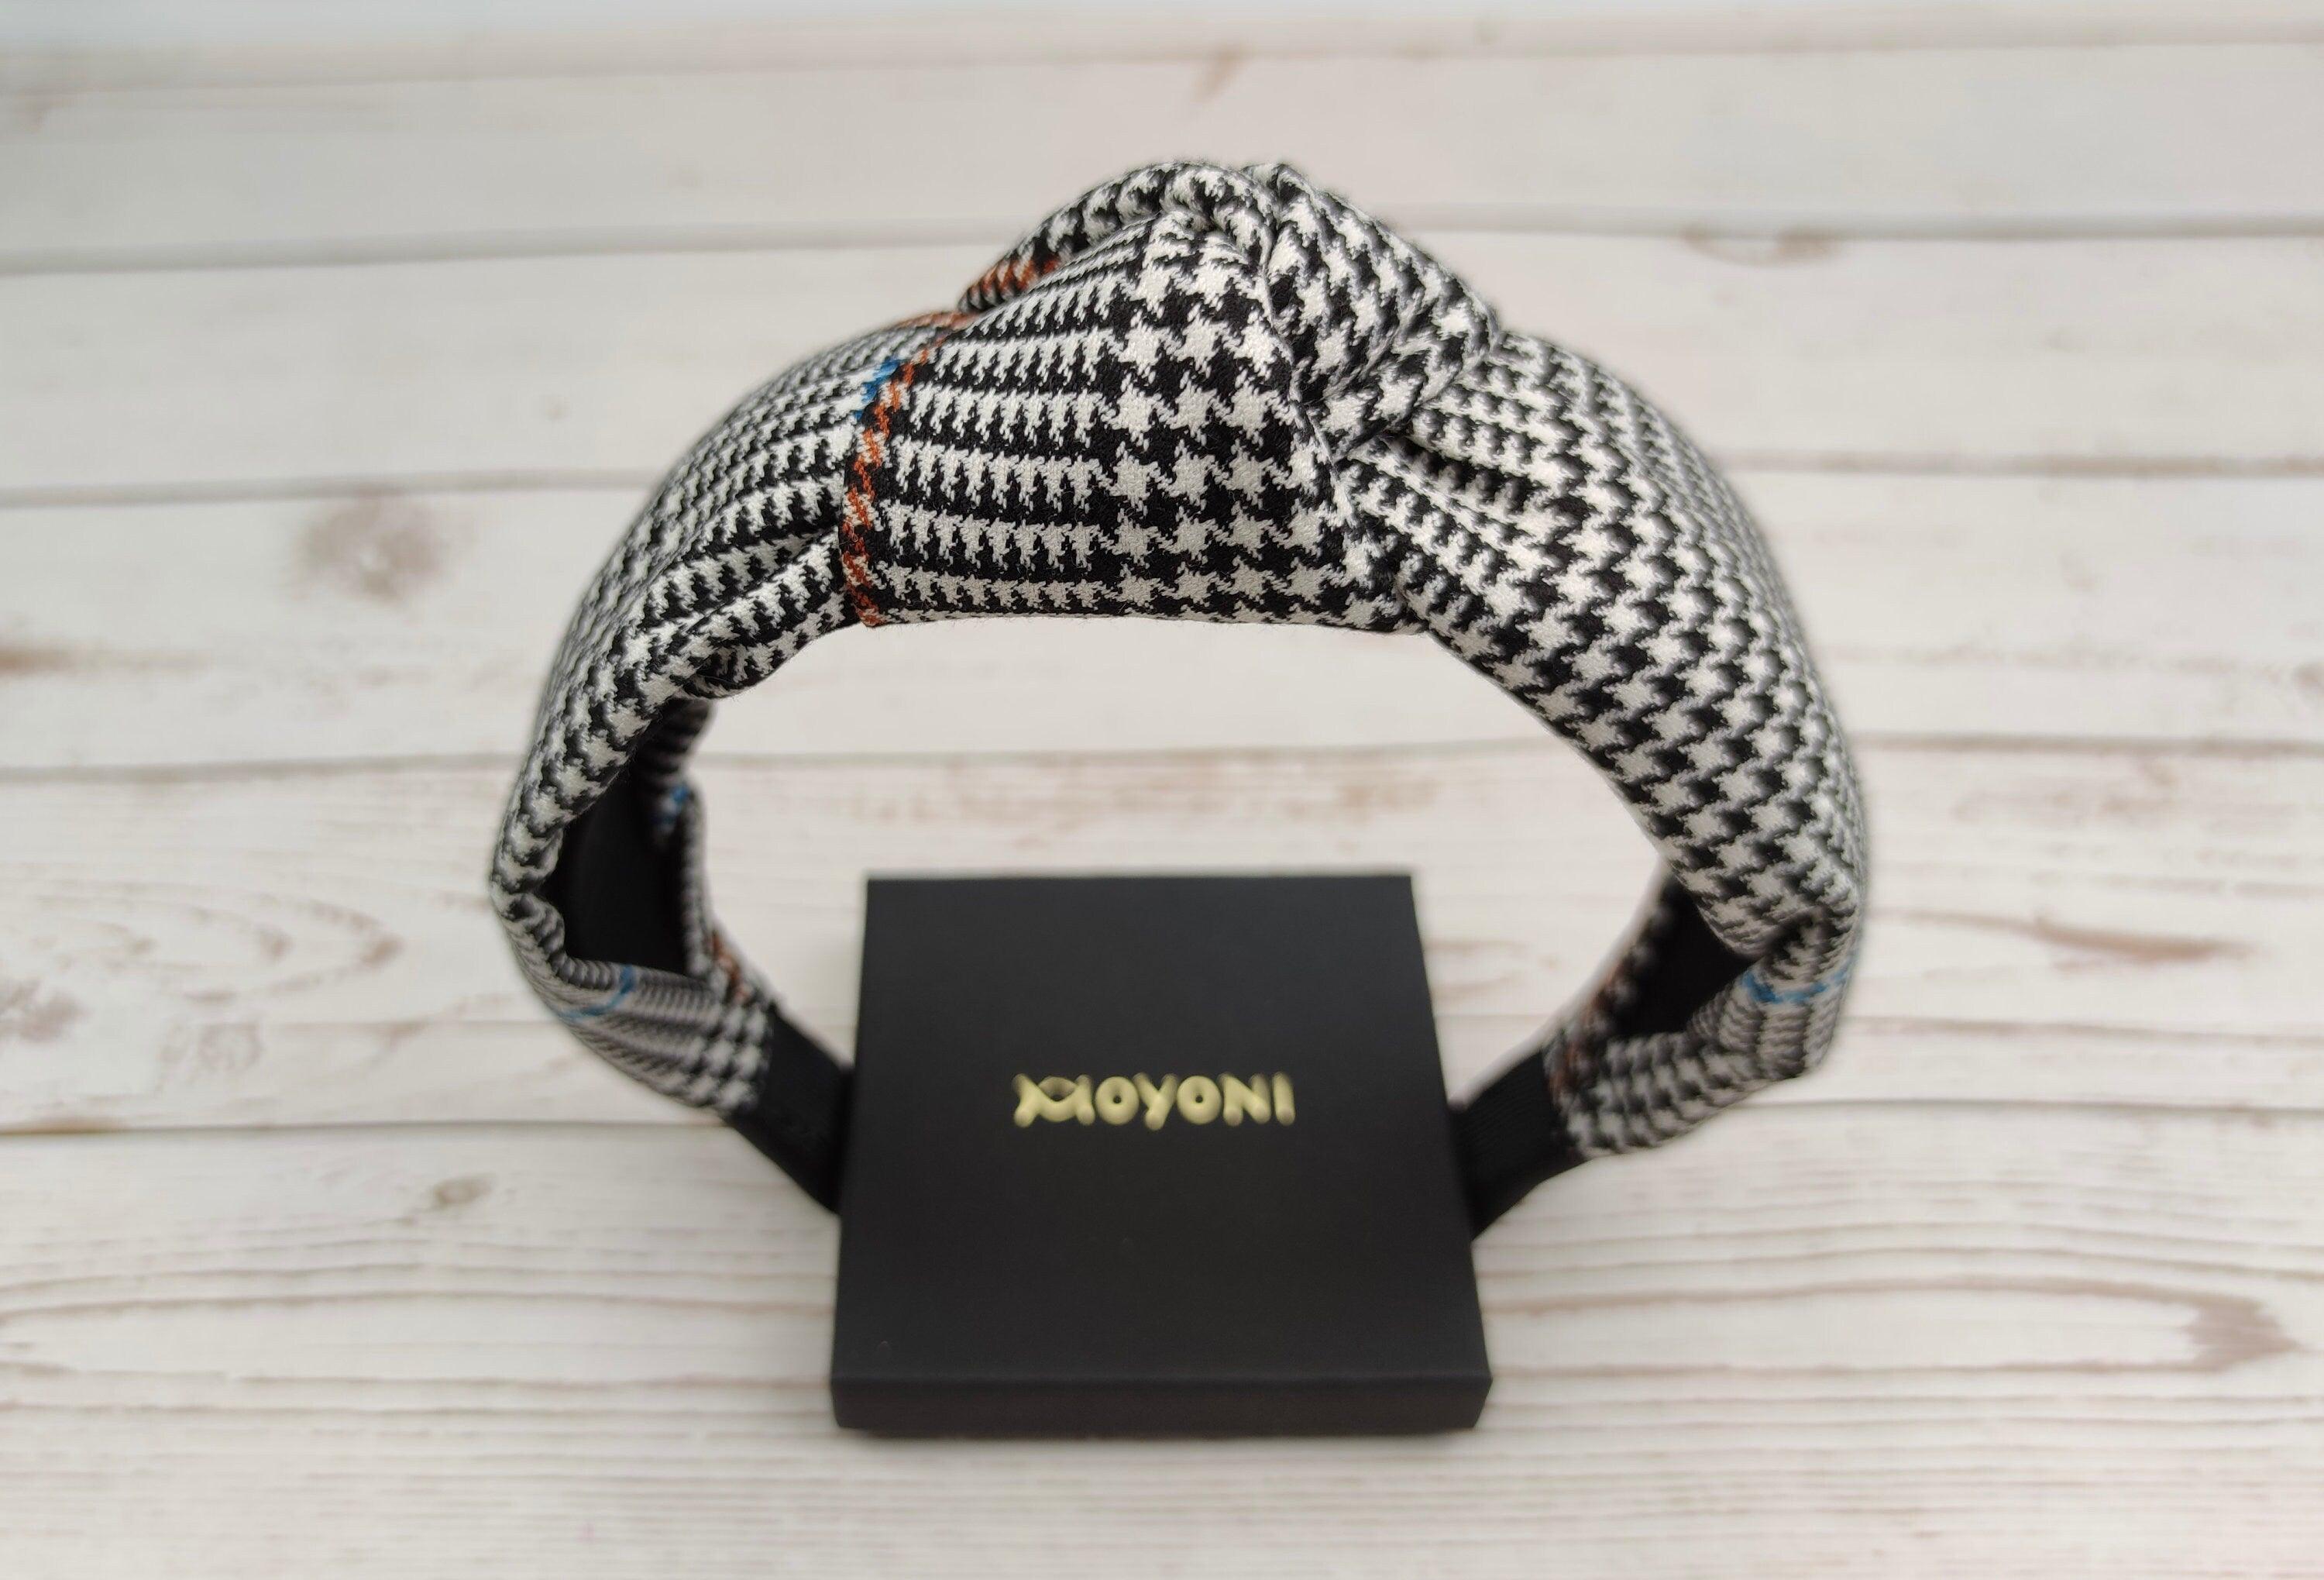 Luxurious Classic Knotted Crepe Headband in White and Black, Perfect for College Fashion and Everyday Wear - Featuring Blue and Orange Stripes available at Moyoni Design